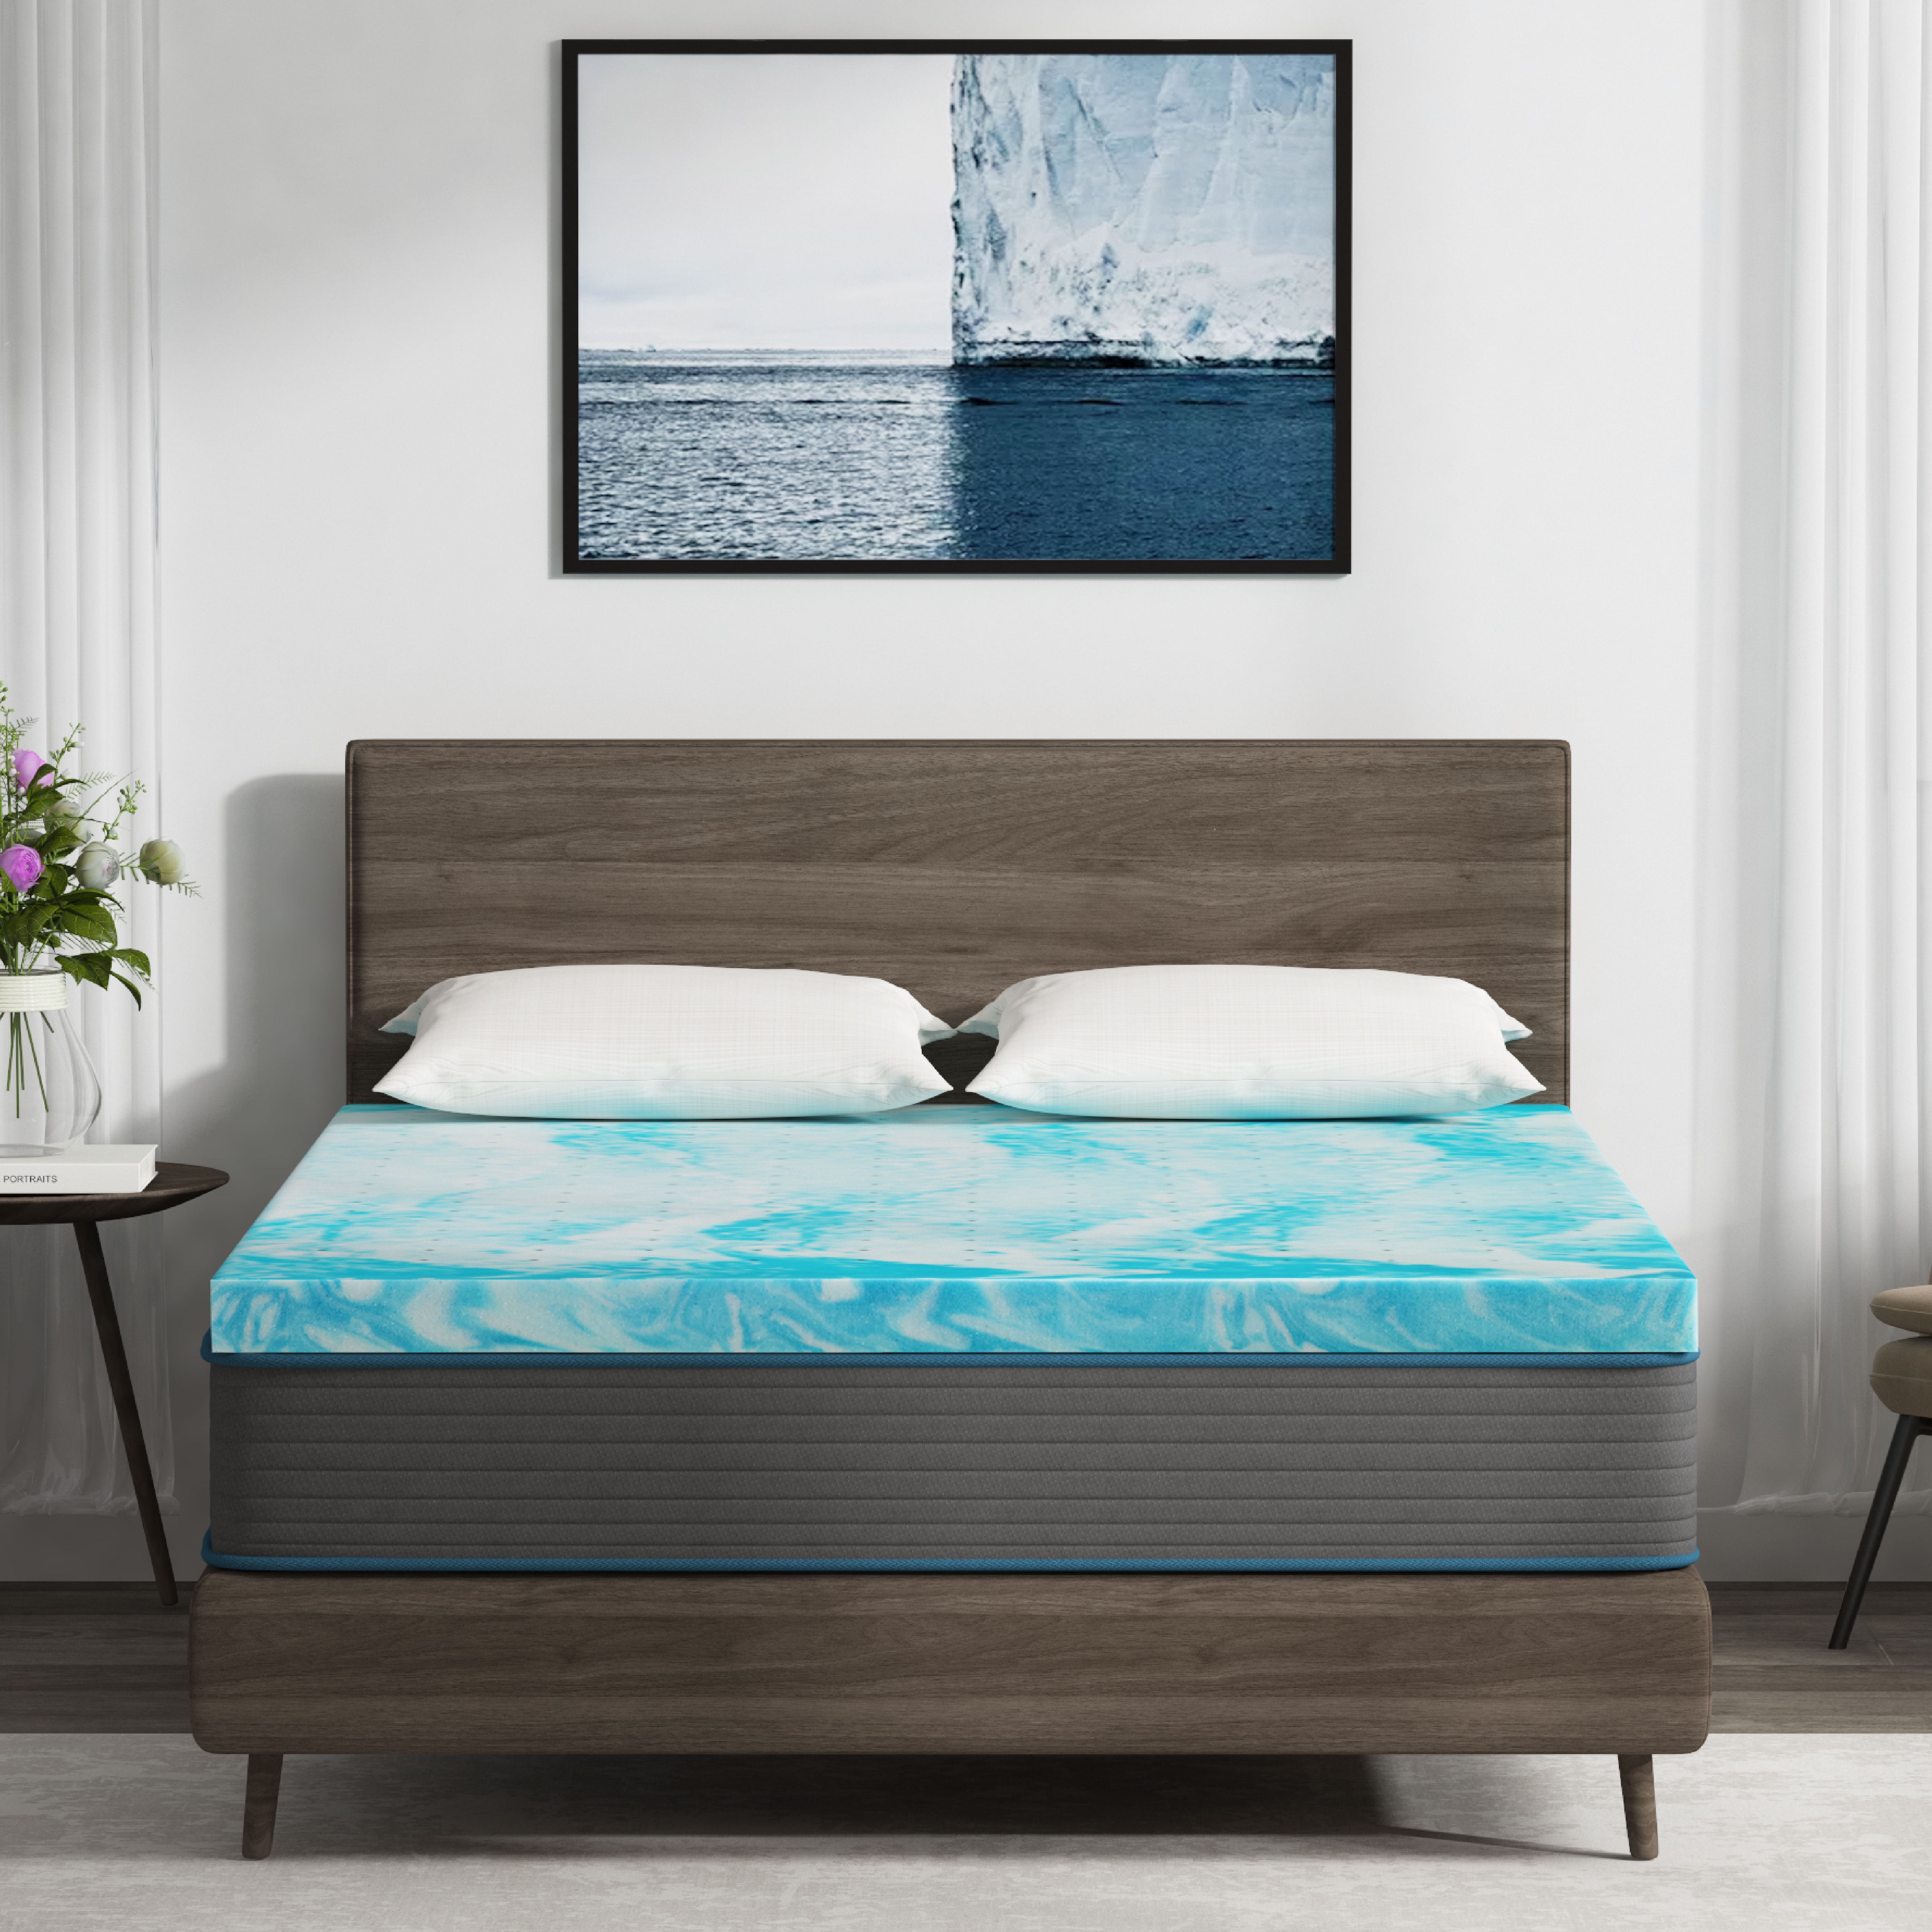 Lucid Comfort Collection 3 in. Gel and Aloe Infused Memory Foam Topper - Twin XL, Blue